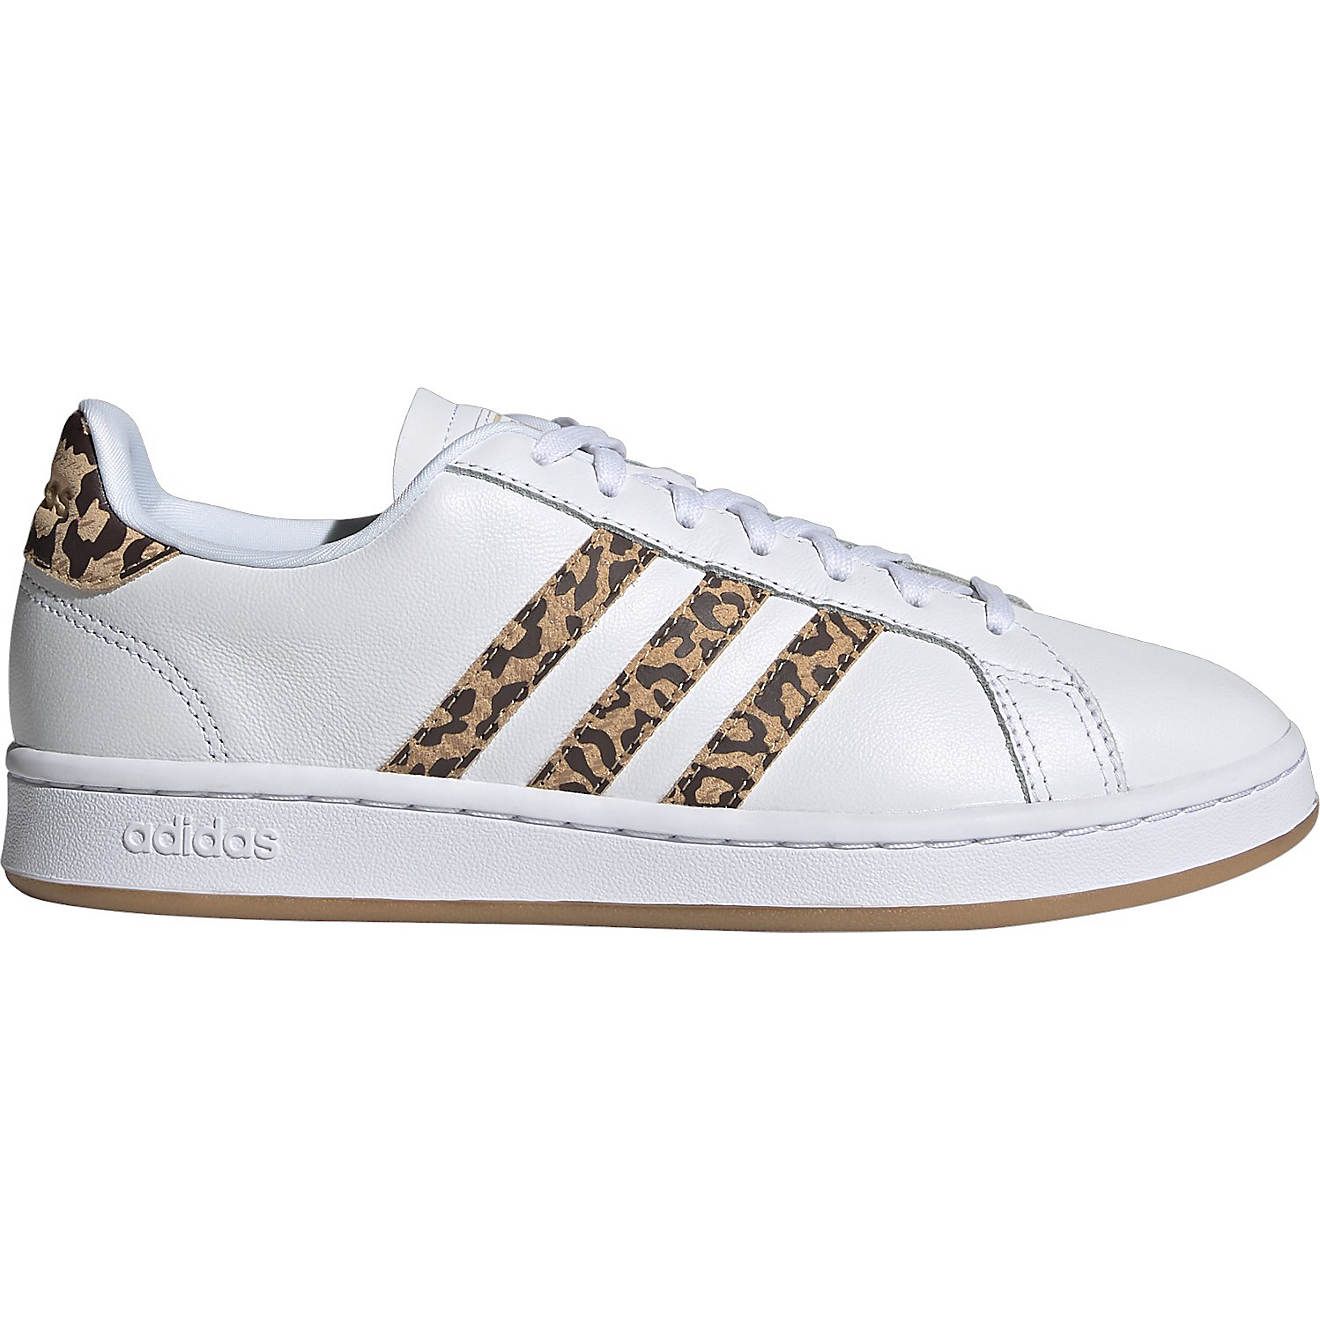 adidas Women's Grand Court Tennis Shoes | Academy Sports + Outdoor Affiliate